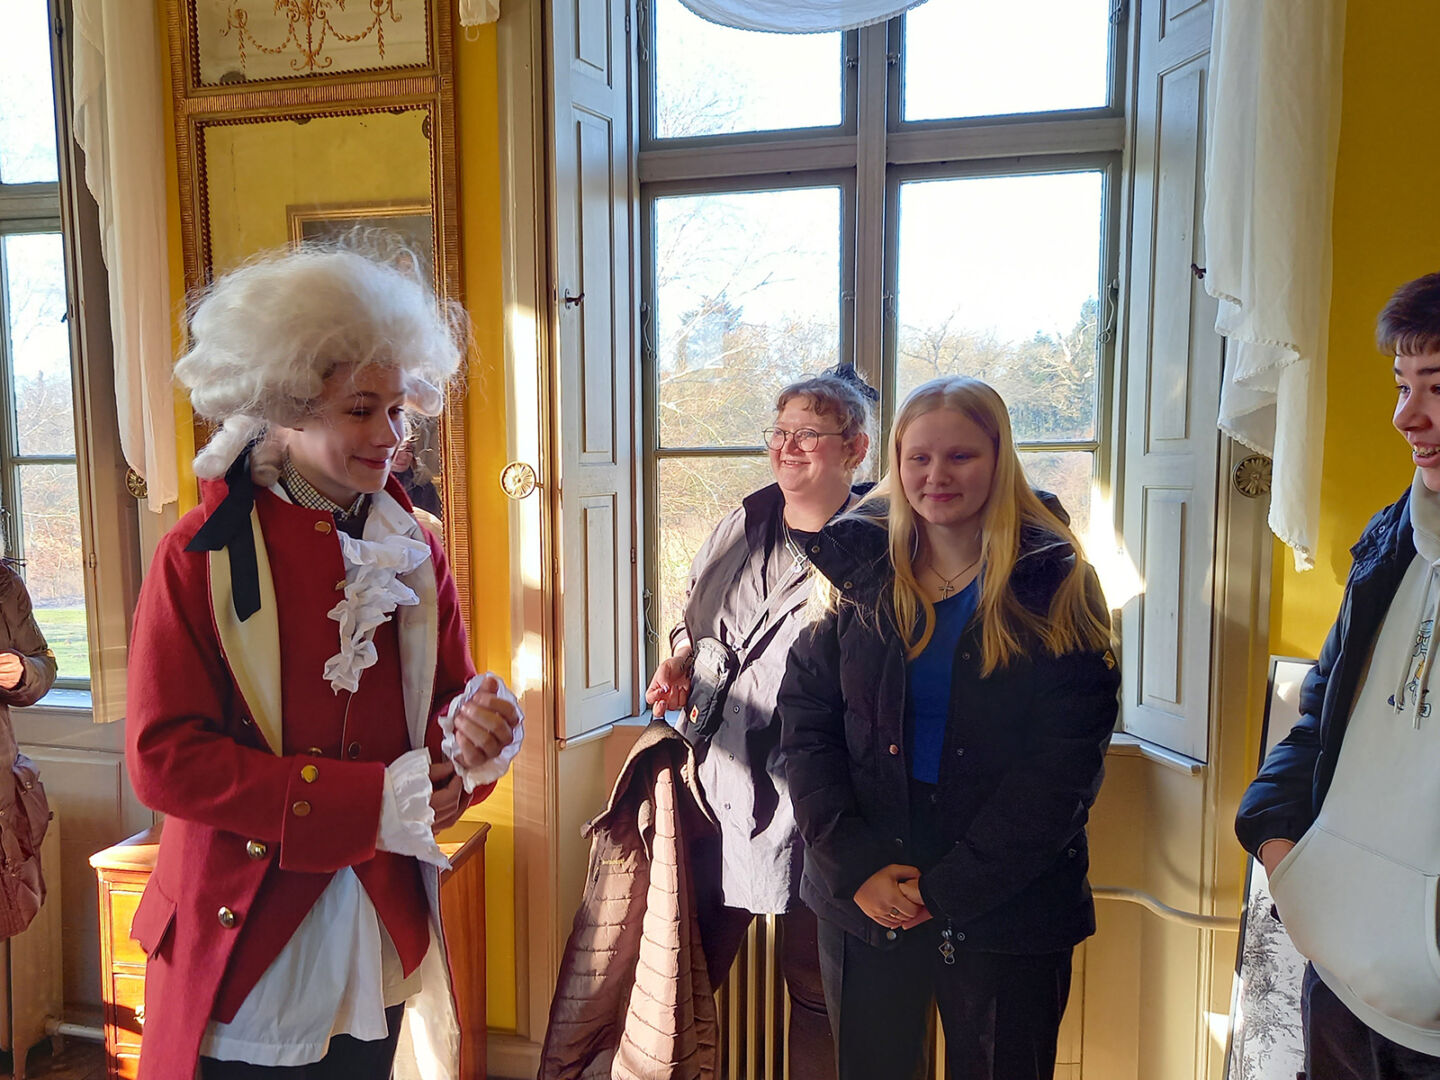 Young people visiting the Reventlow-Museet Pederstrup where they meet people in the costume of the time.